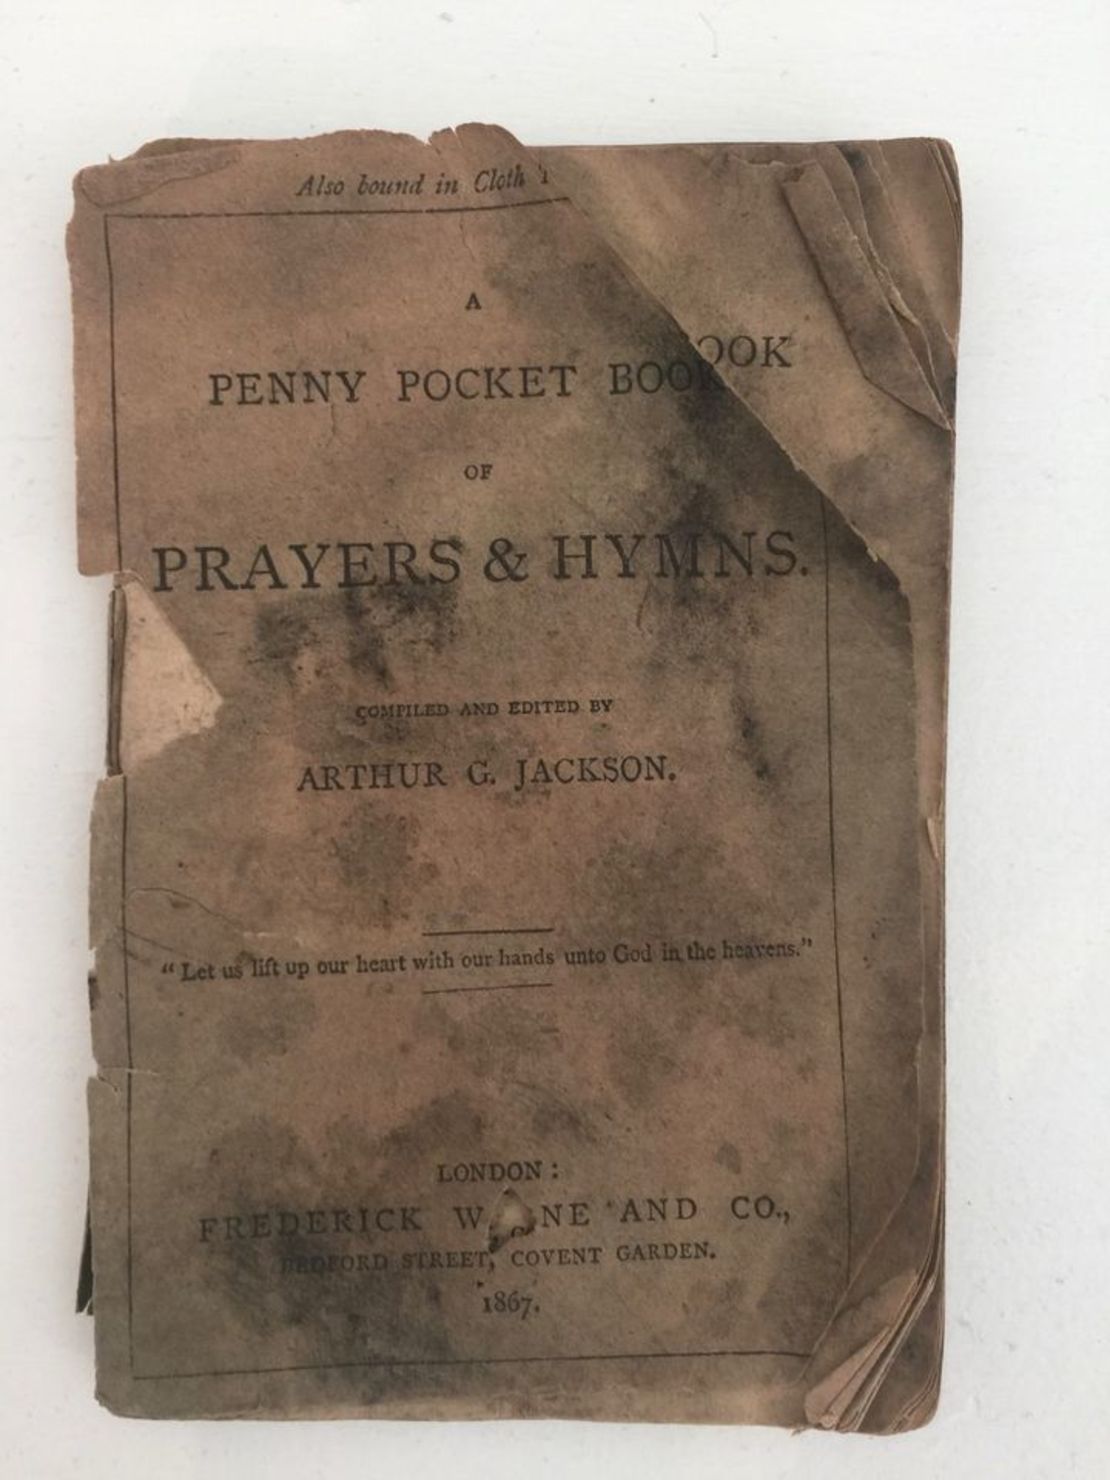 A prayer book was discovered under the floorboards. The offices of the book's publisher were close to van Gogh's workplace in Covent Garden. 